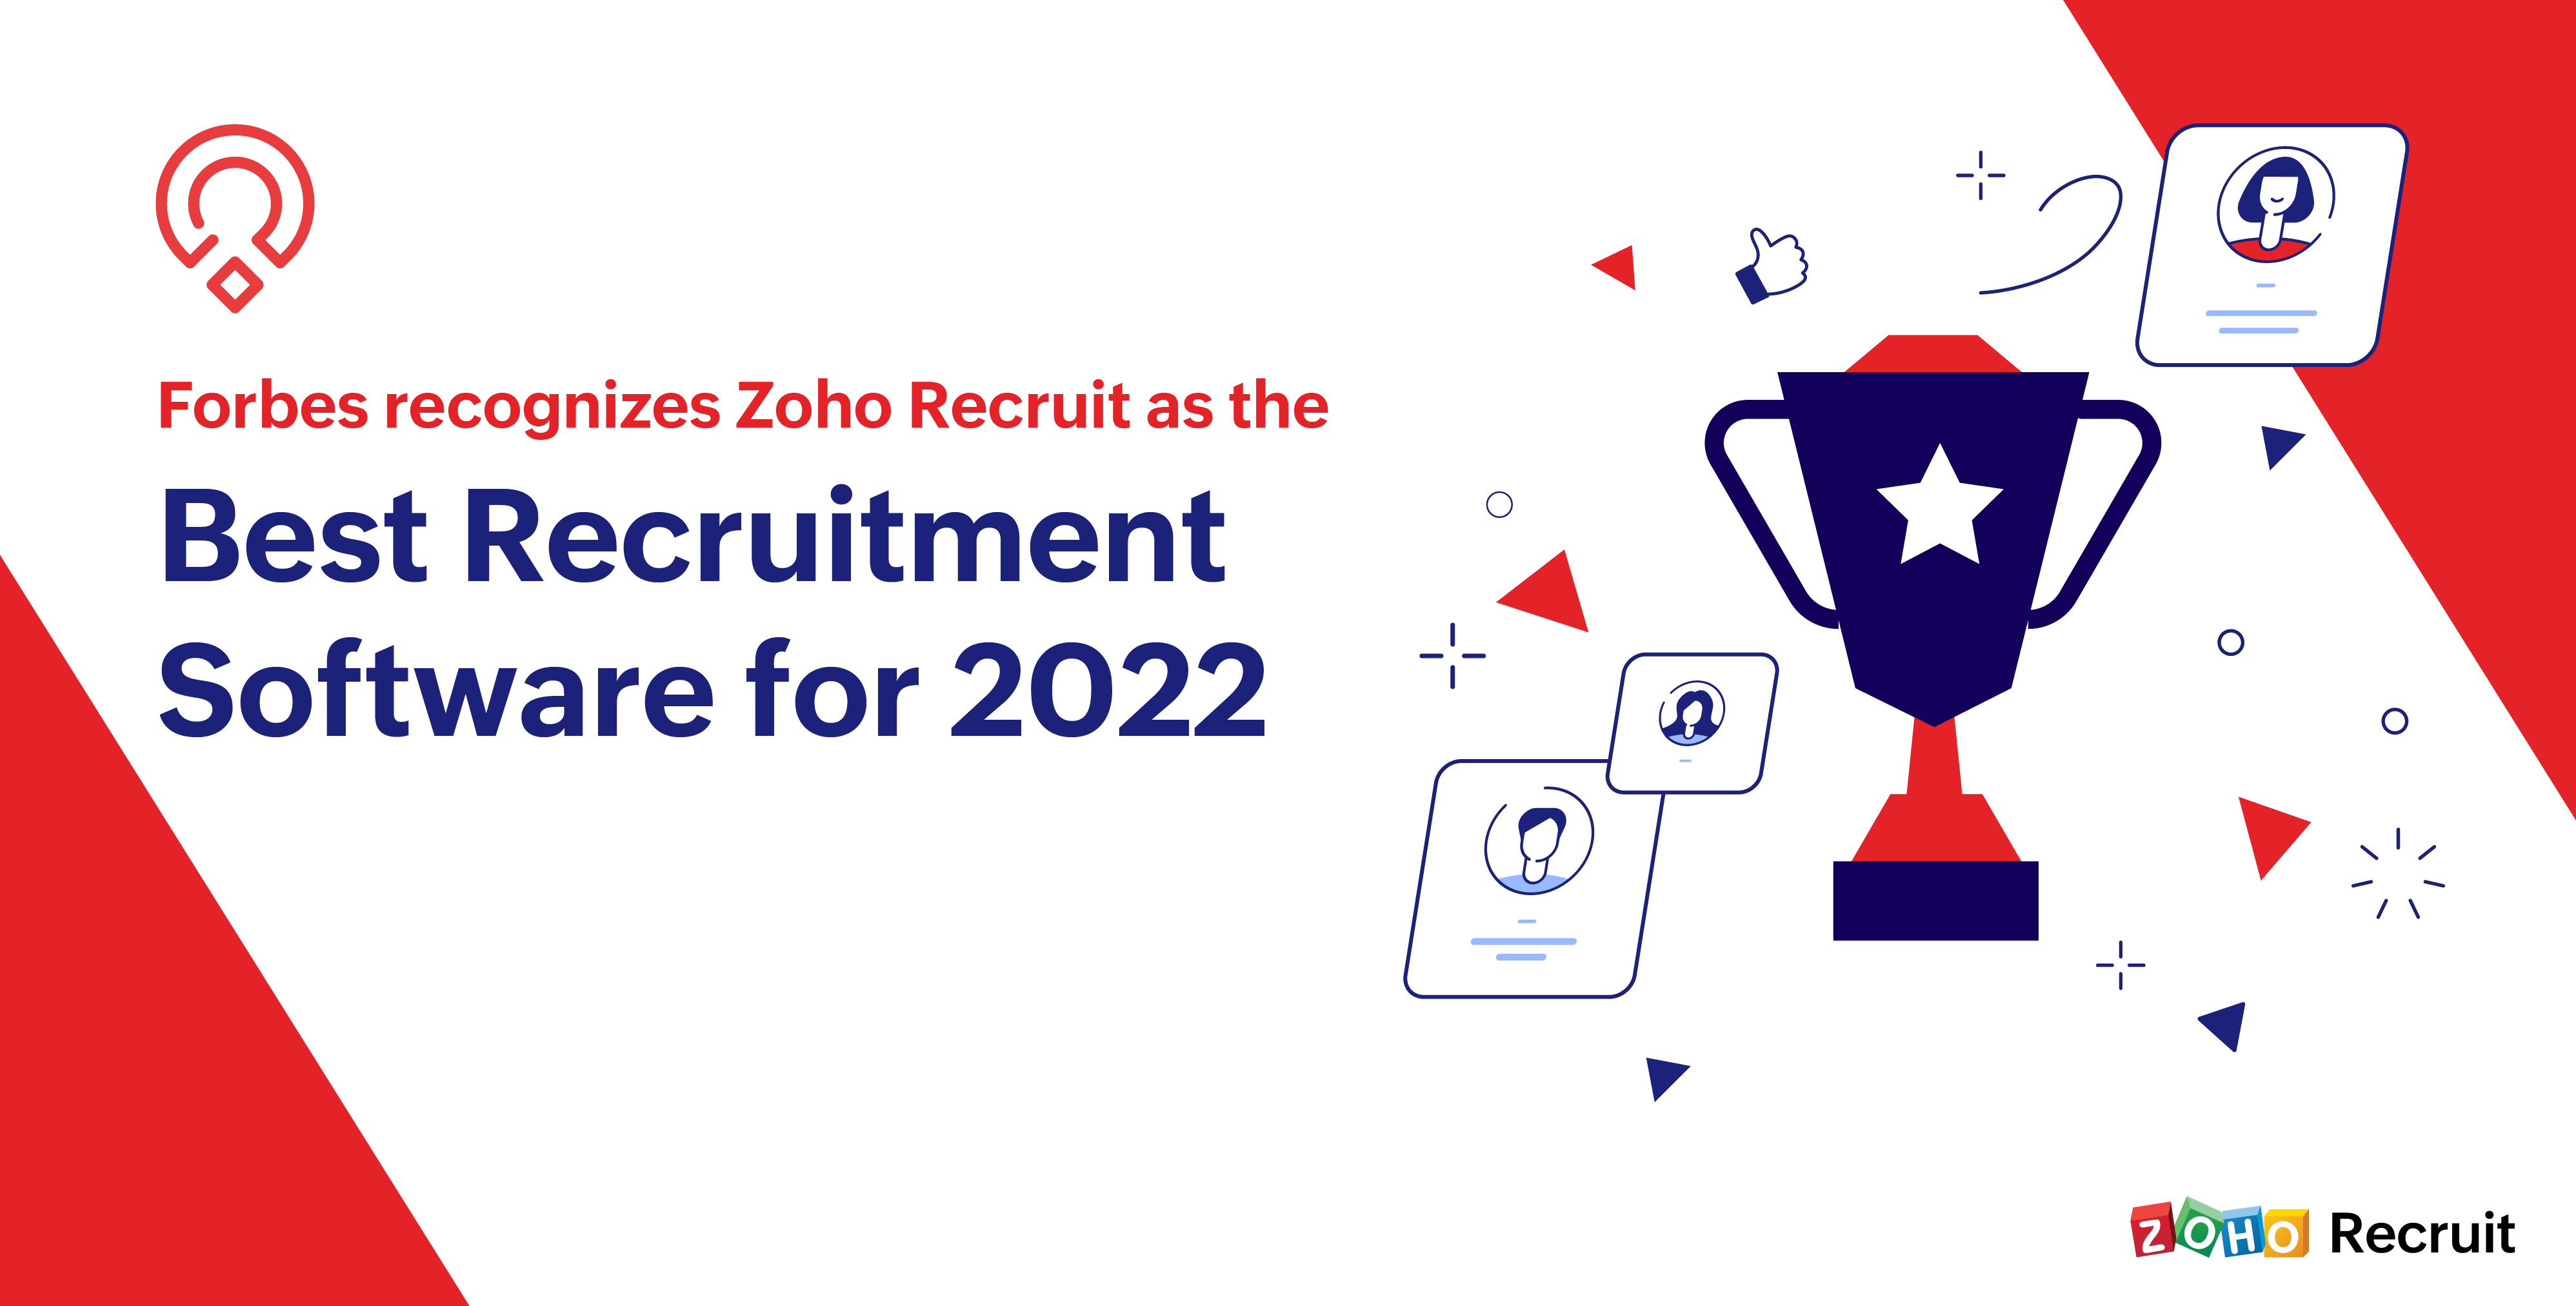 Forbes recognizes Zoho Recruit as the best recruitment software for 2022